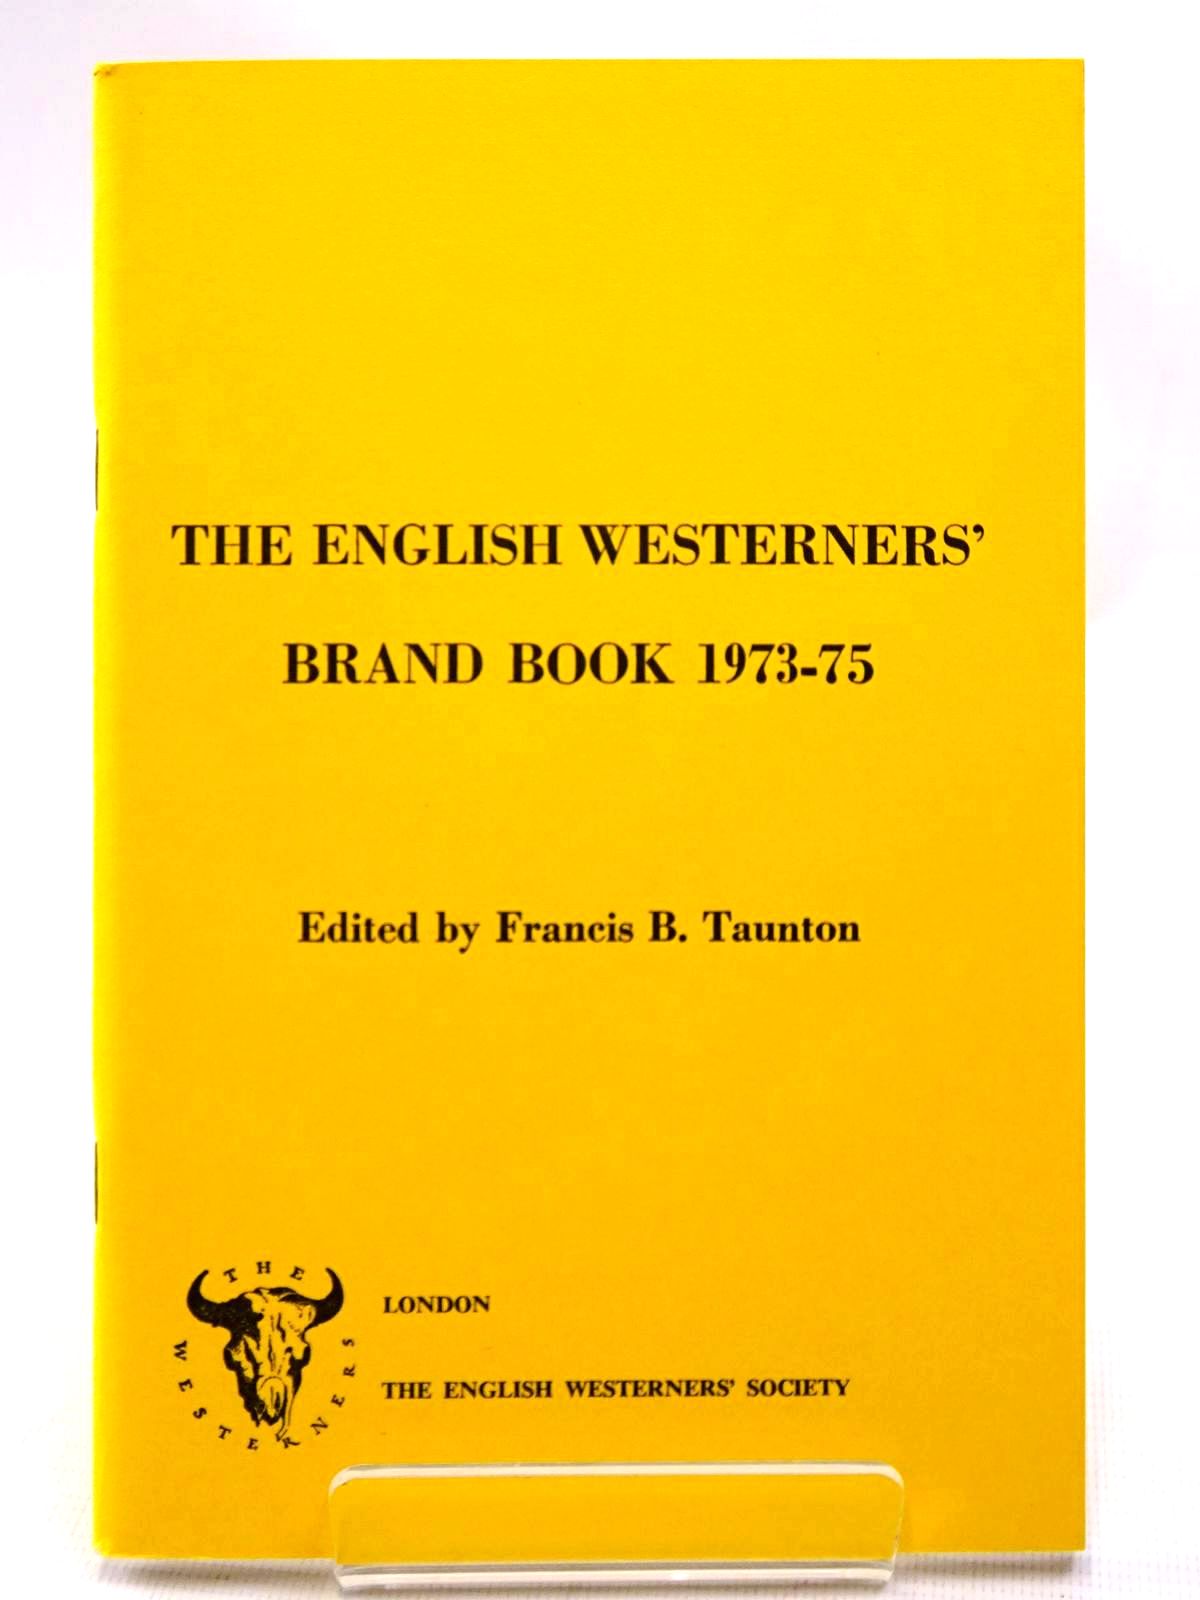 TAUNTON, FRANCIS B. & JOHNSON, BARRY C. & EDEN, M.C. & WYBROW, ROBERT J. & ET AL, ILLUSTRATED BY YOUNG, S.B.M. - The English Westerners' Brand Book 1973- 75